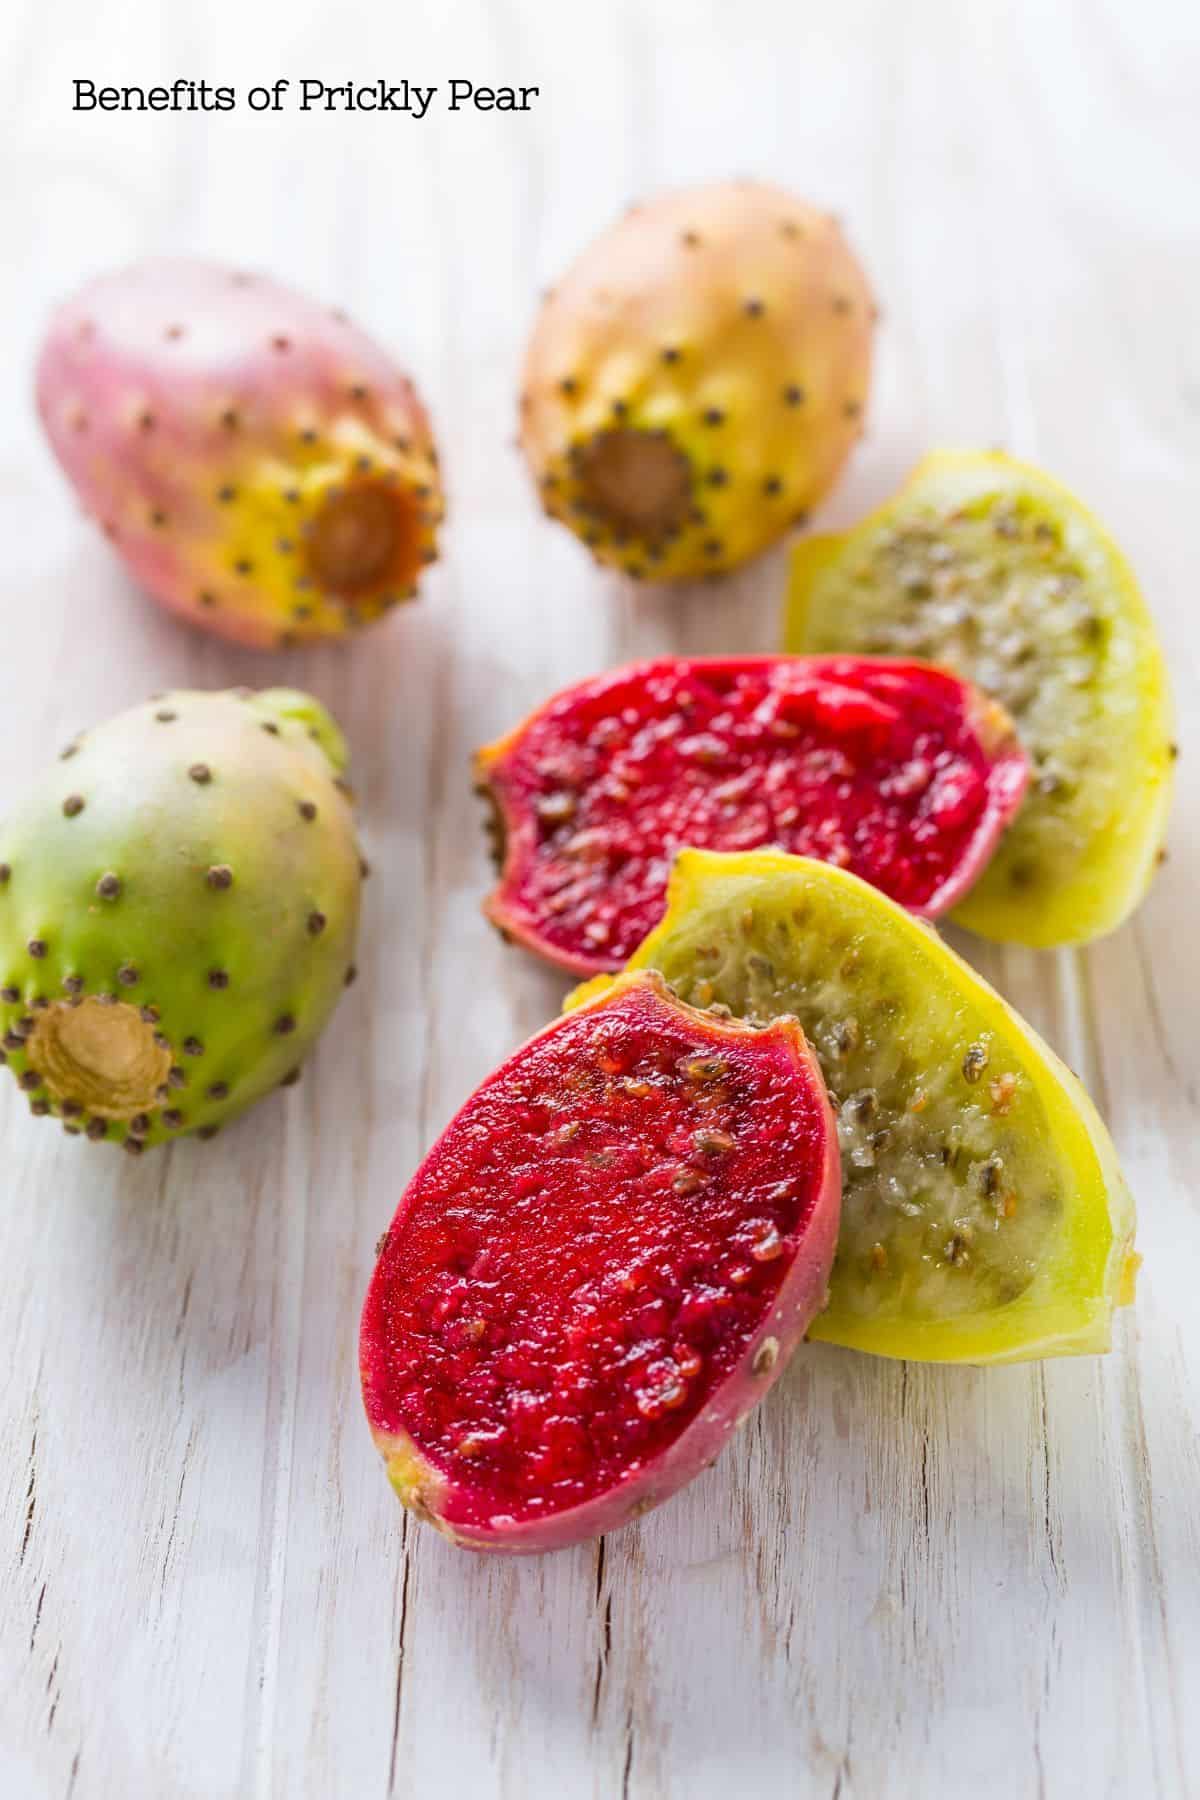 Red and yellow prickly pear fruit cut open to show the juicy inner fruit.